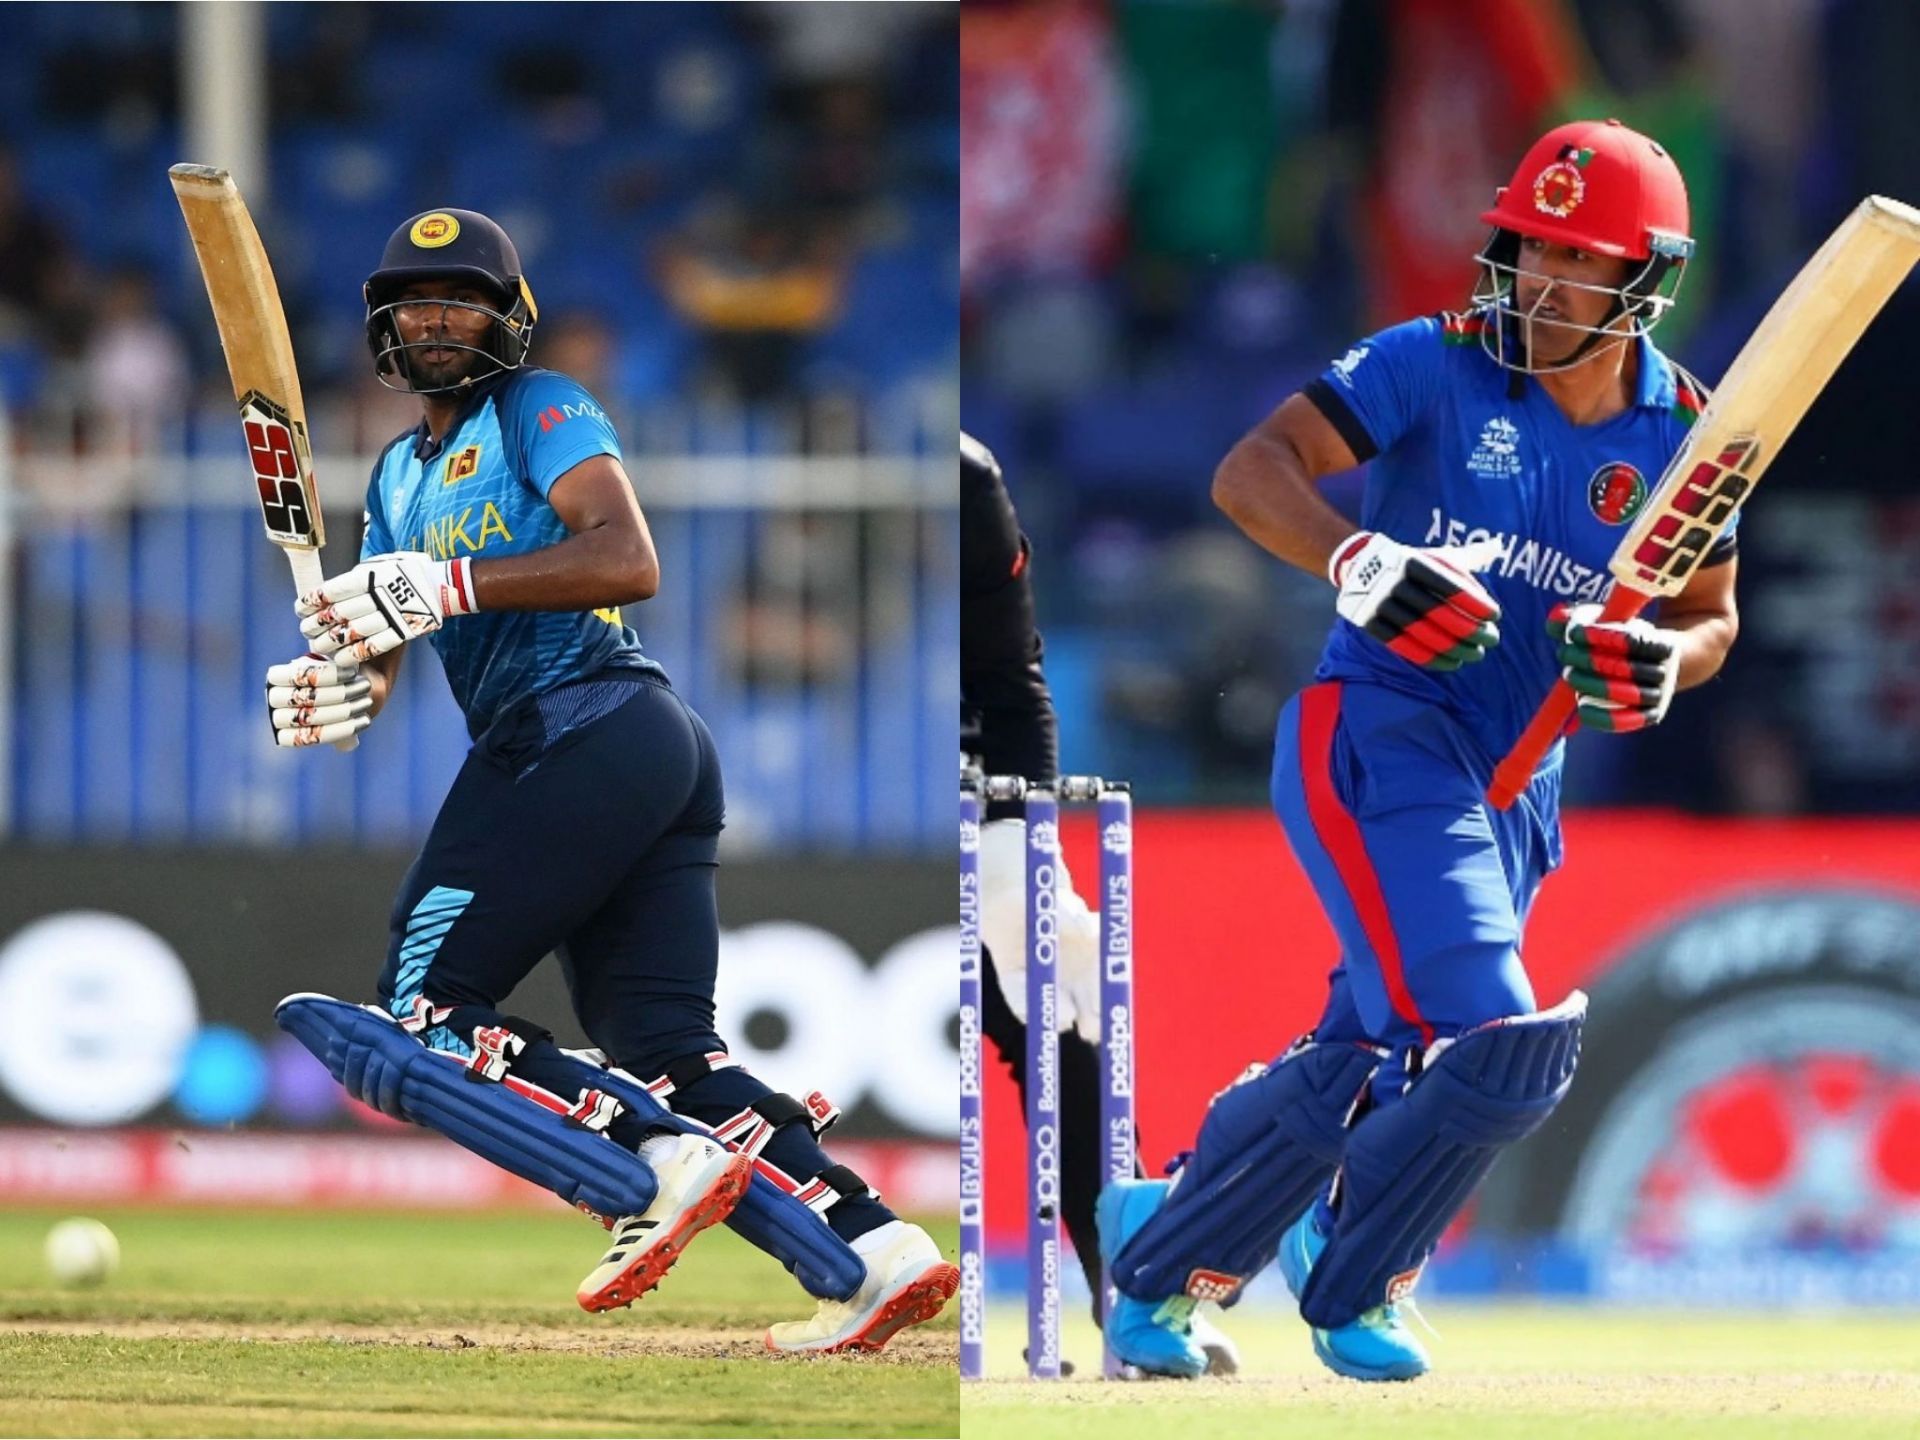 Sri Lanka and Afghanistan will square off against each other on August 27